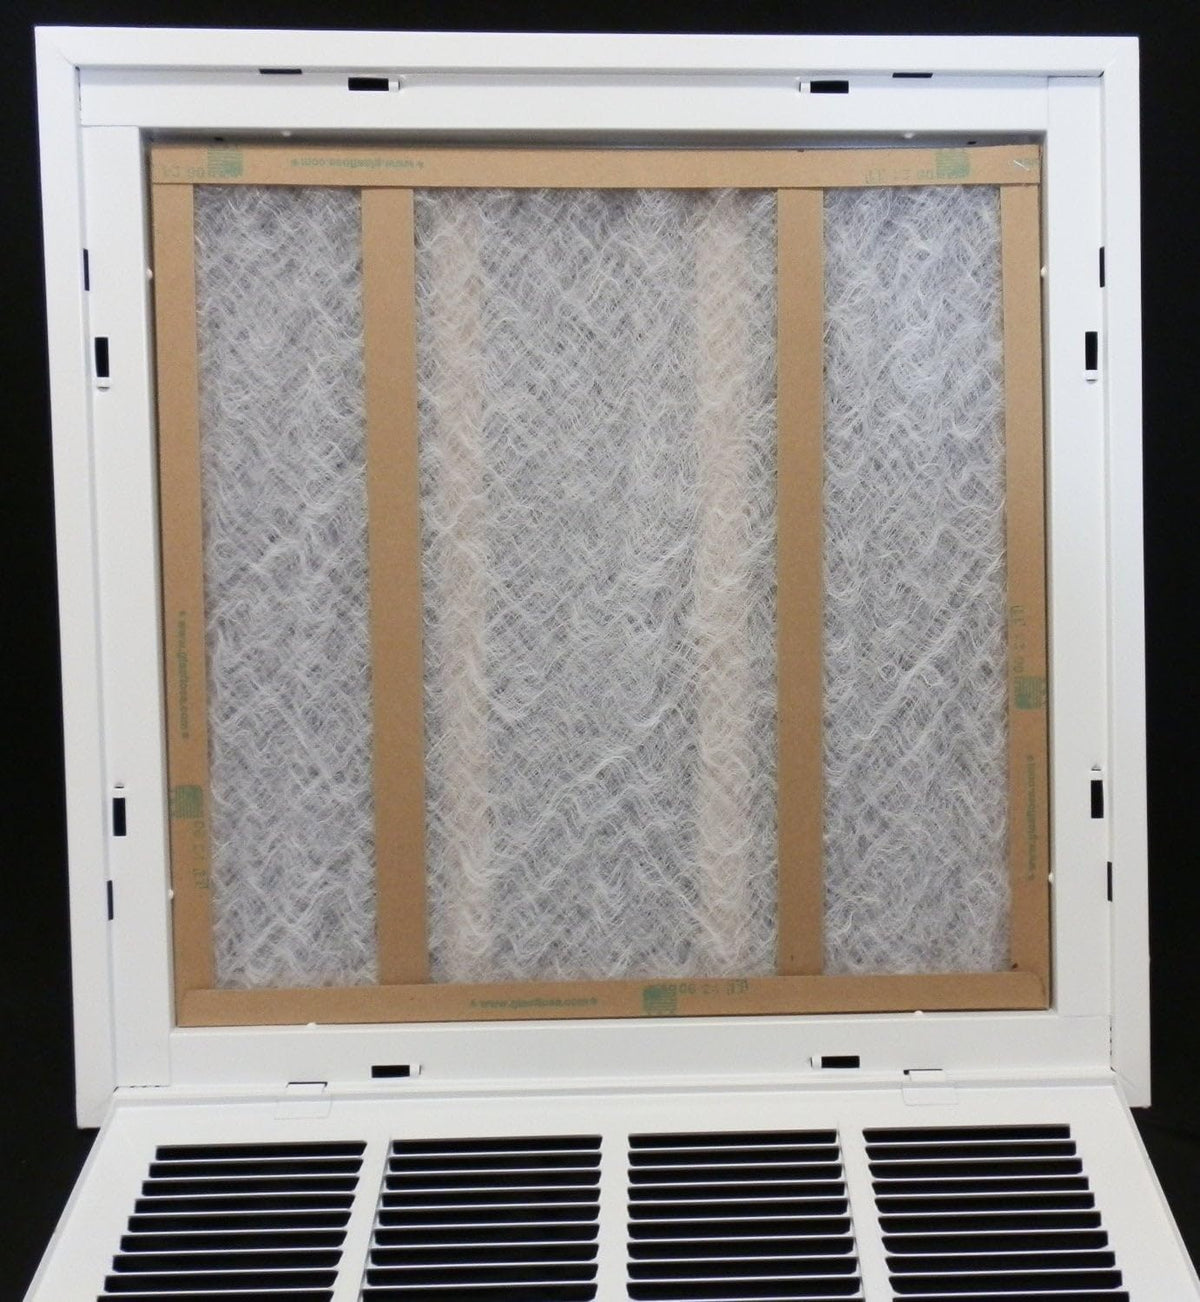 12&quot; X 18&quot; Steel Return Air Filter Grille for 1&quot; Filter - Fixed Hinged - [Outer Dimensions: 14 5/8&quot; X 20 5/8&quot;]